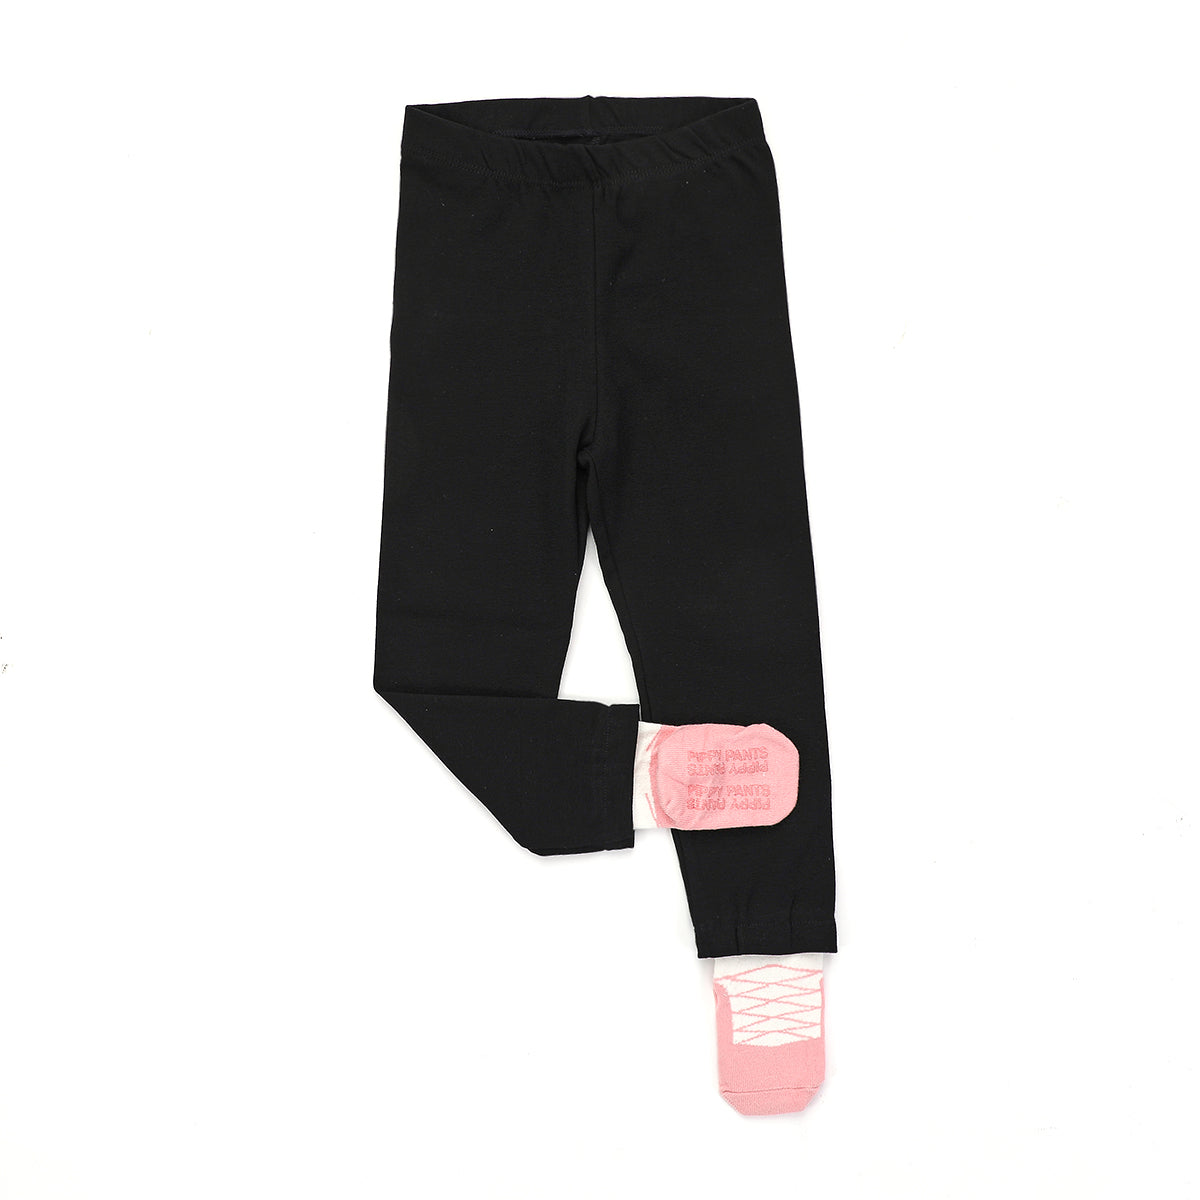 The Bellina - Soft Stretch Legging Footed Bottoms